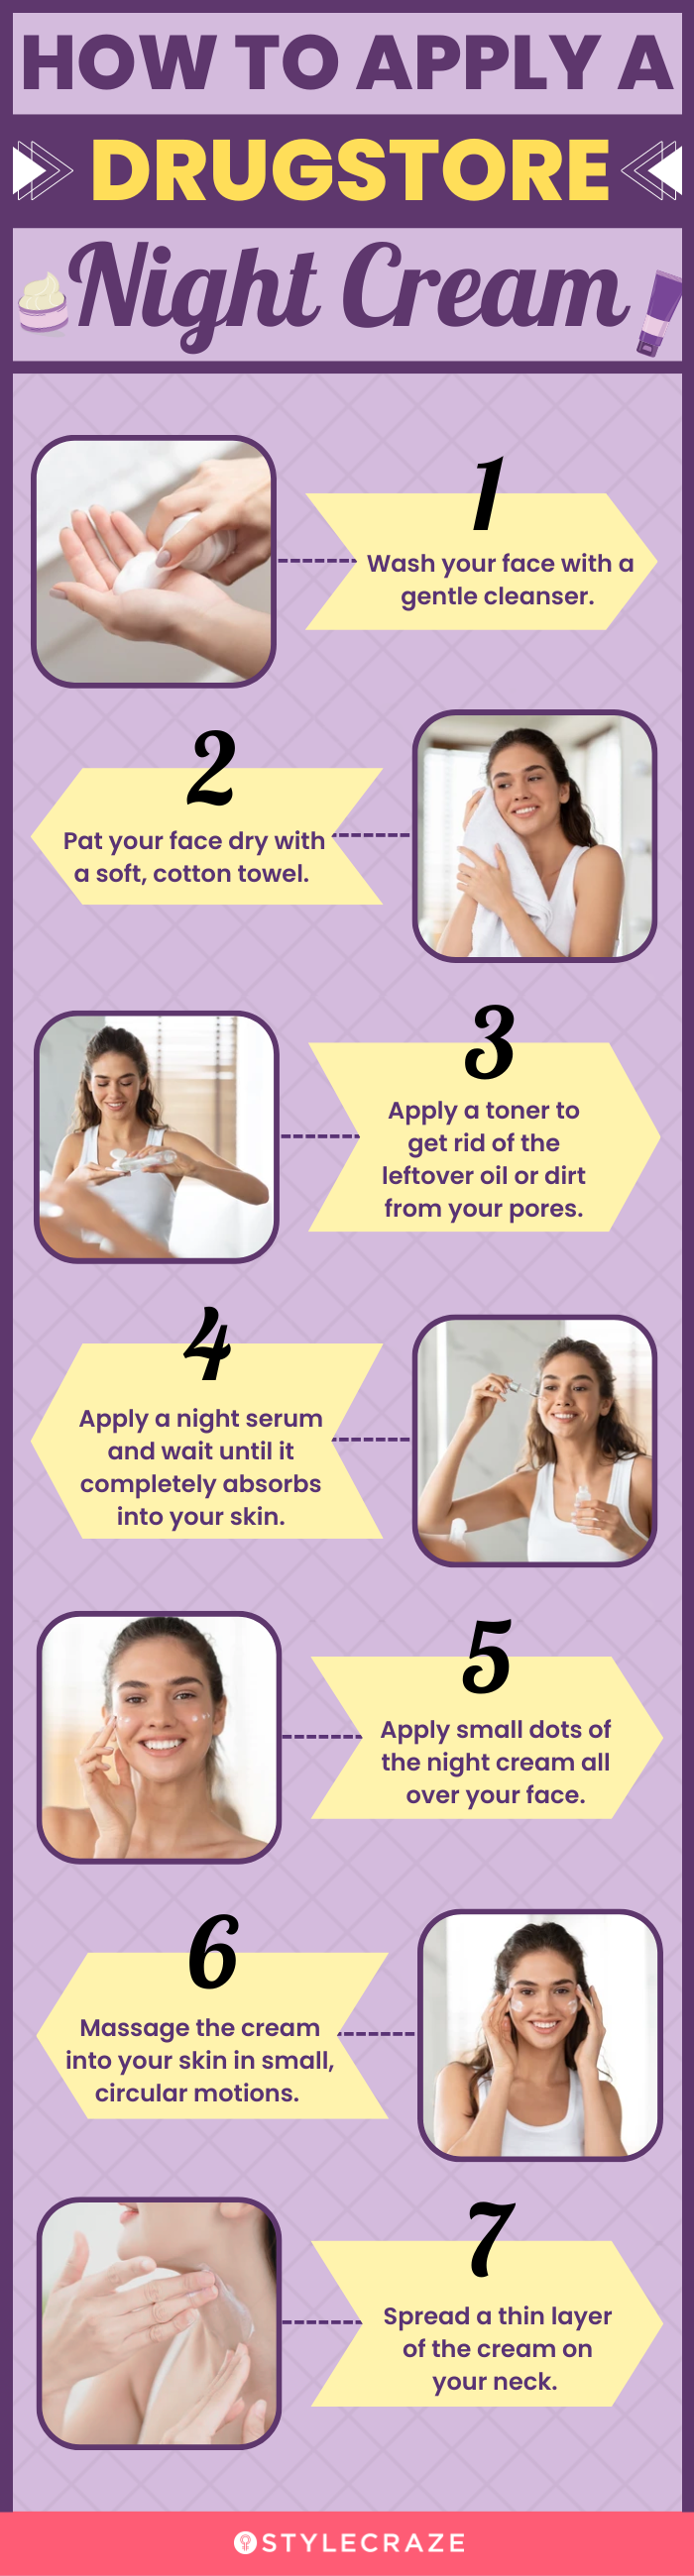 How To Apply A Drugstore Night Cream (infographic)